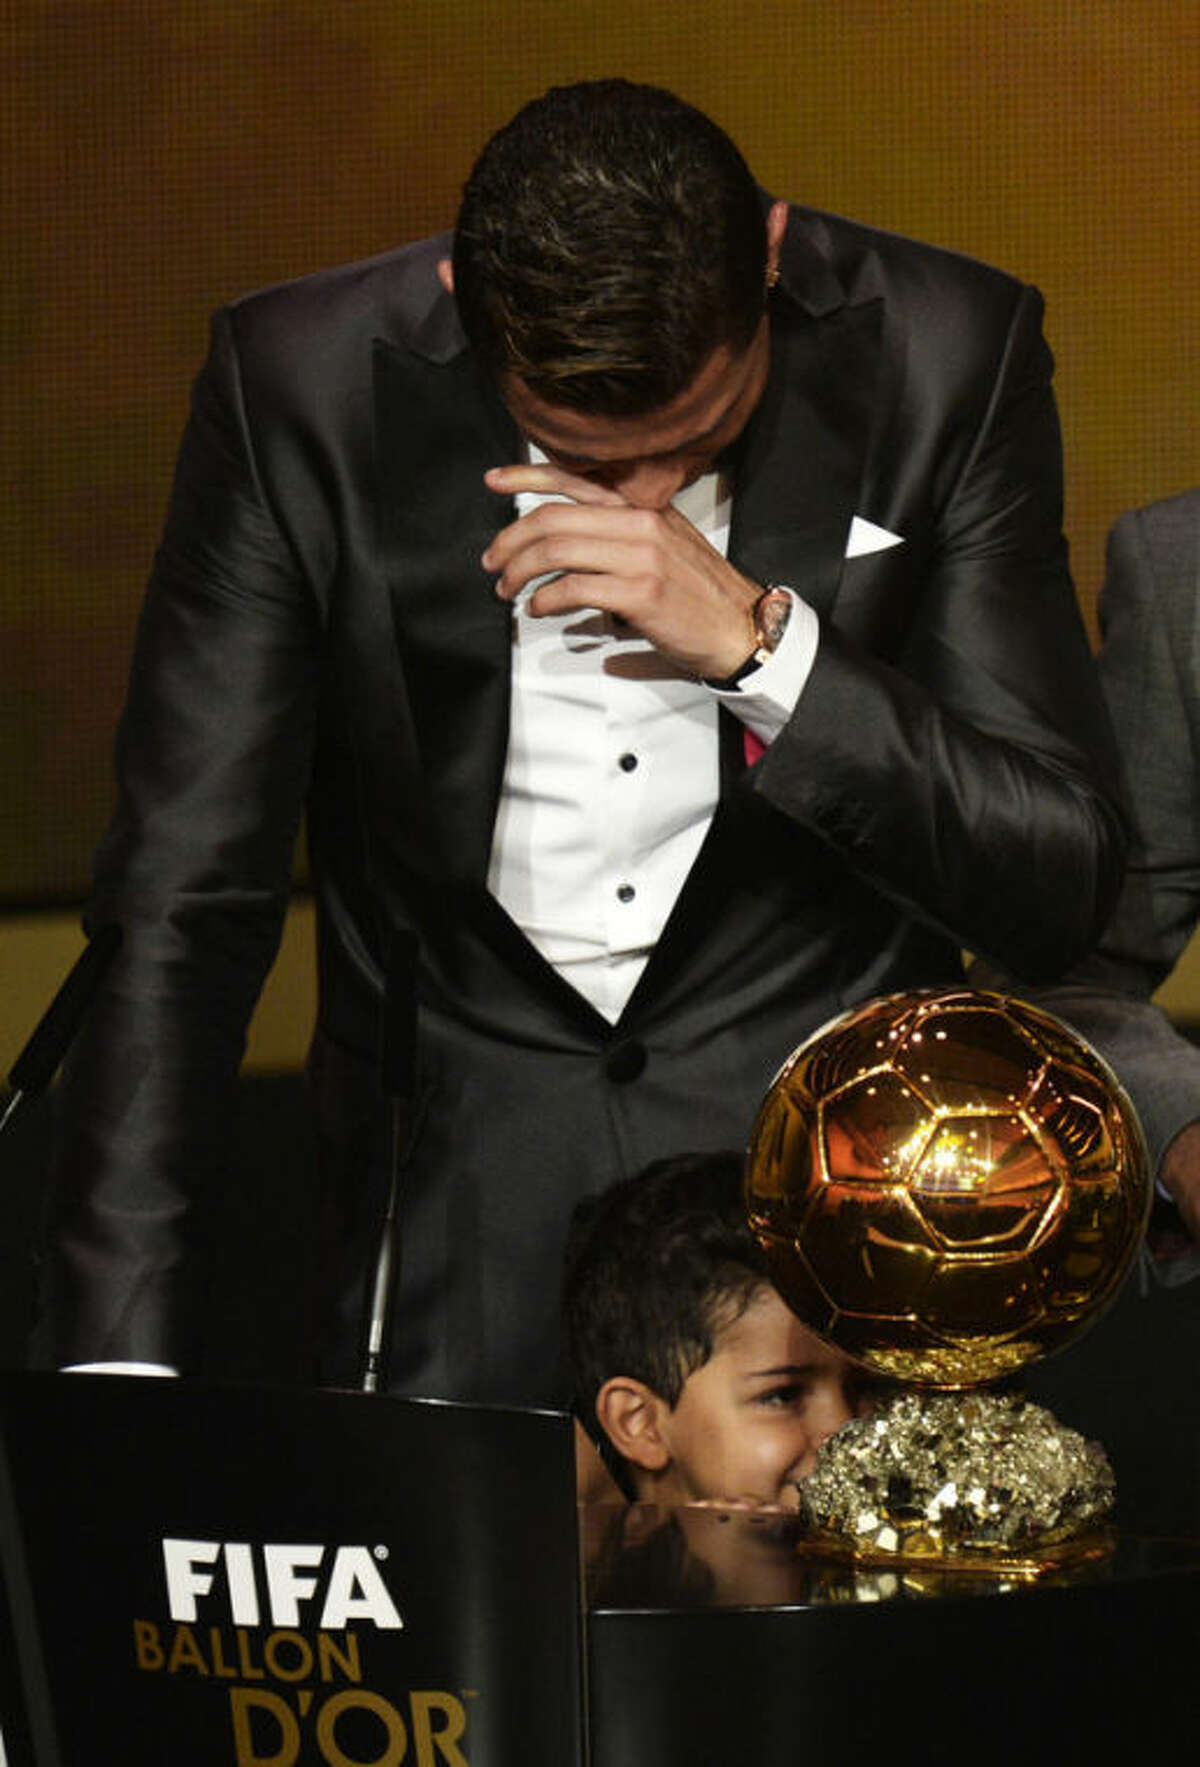 Cristiano Ronaldo of Portugal cries as he is awarded the prize for the FIFA Men's soccer player of the year 2013 at the FIFA Ballon d'Or 2013 gala at the Kongresshaus in Zurich, Switzerland, Monday, Jan. 13, 2014. (AP Photo, Keystone/Steffen Schmidt)